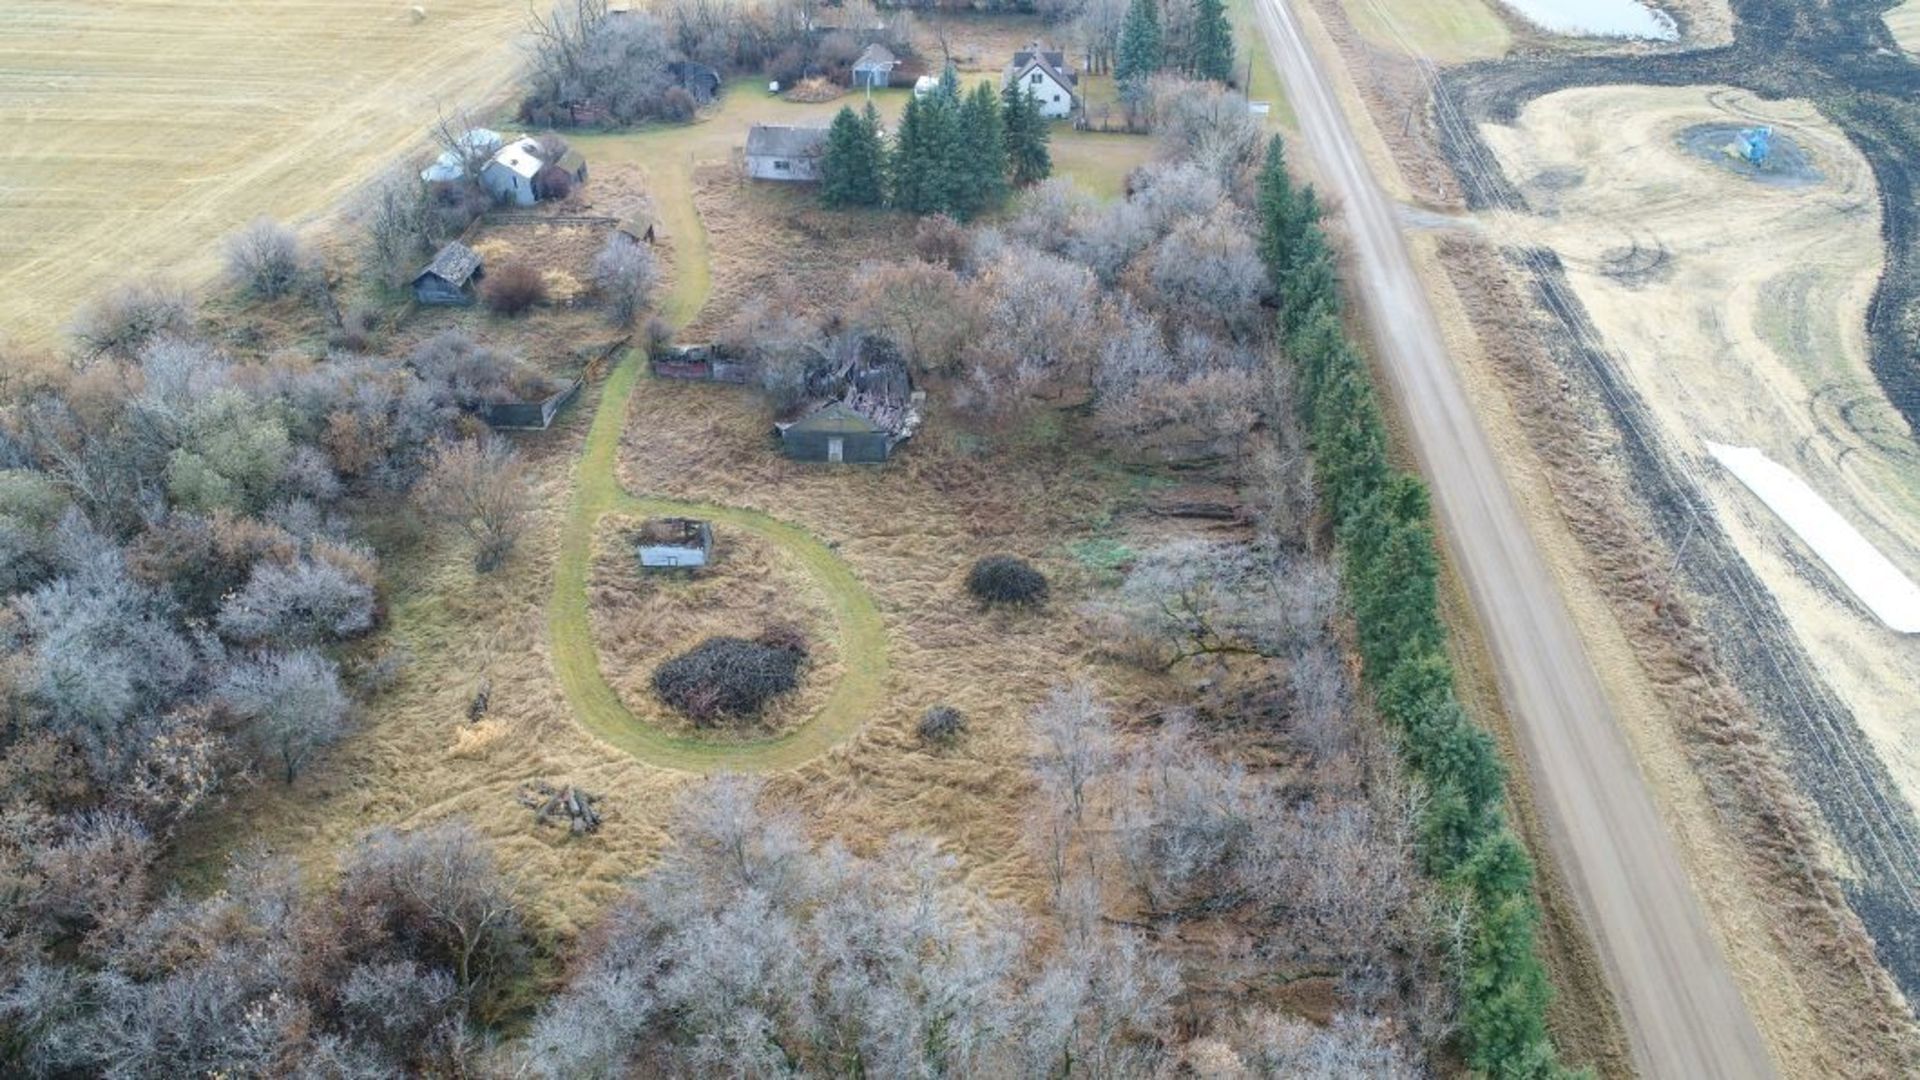 160+/- Total Acres NW 8-56-20-W4, Bruderheim, AB, consisting of Crop Land, Surface Lease & Yard Site - Image 5 of 34